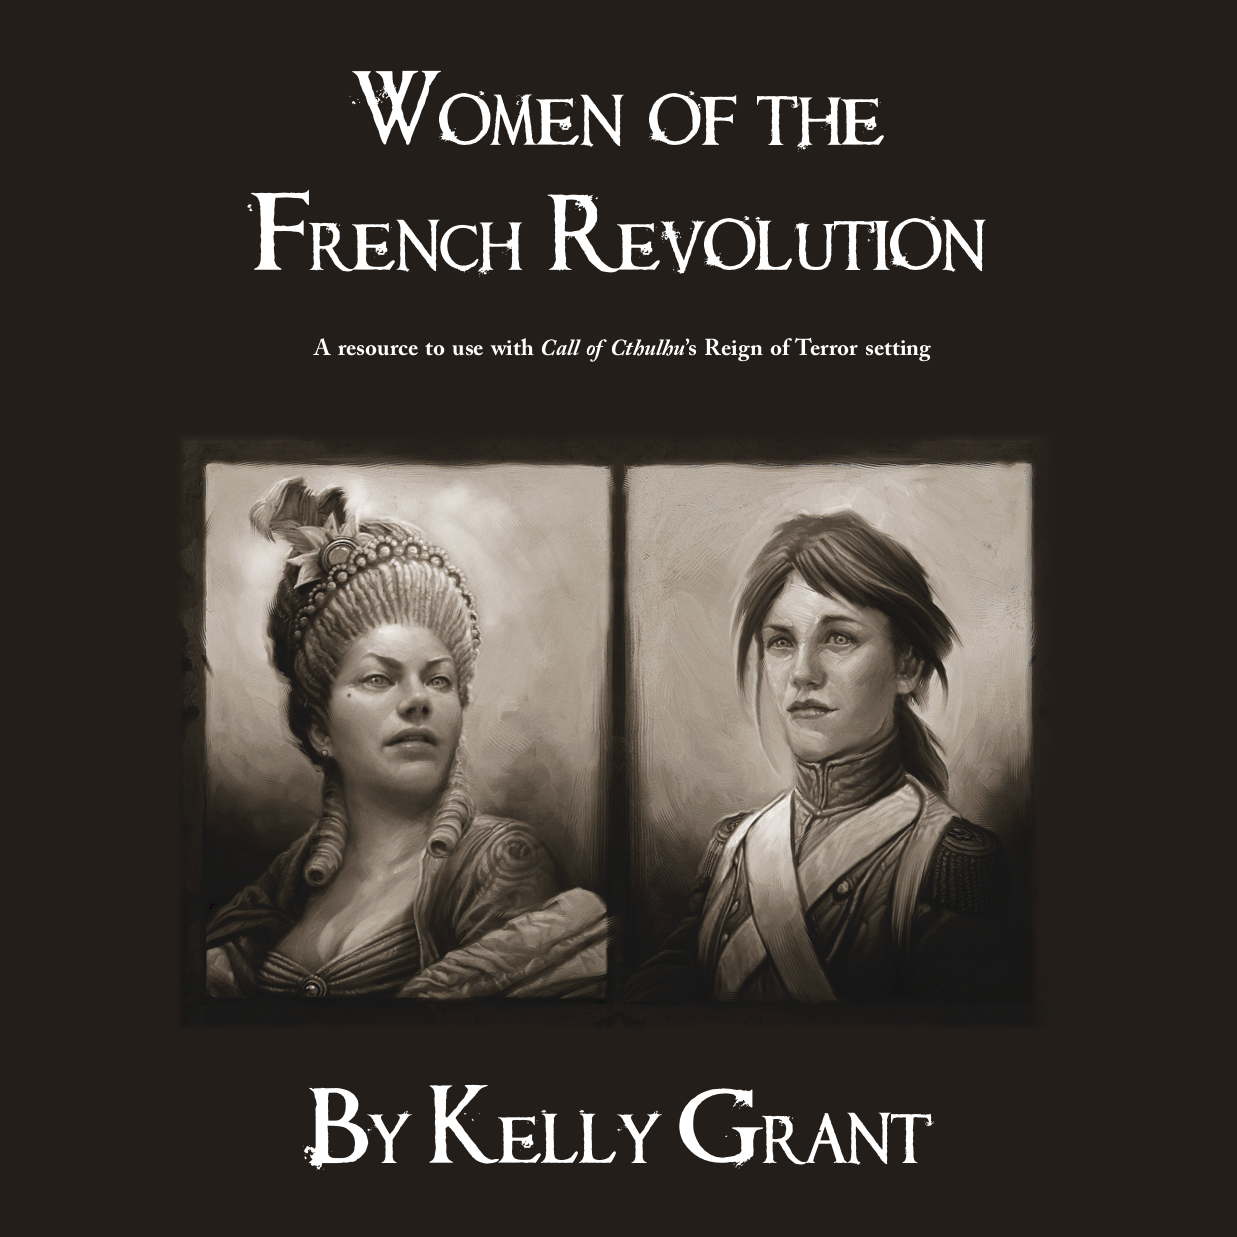 Women of the French Revolution by Kelly Grant